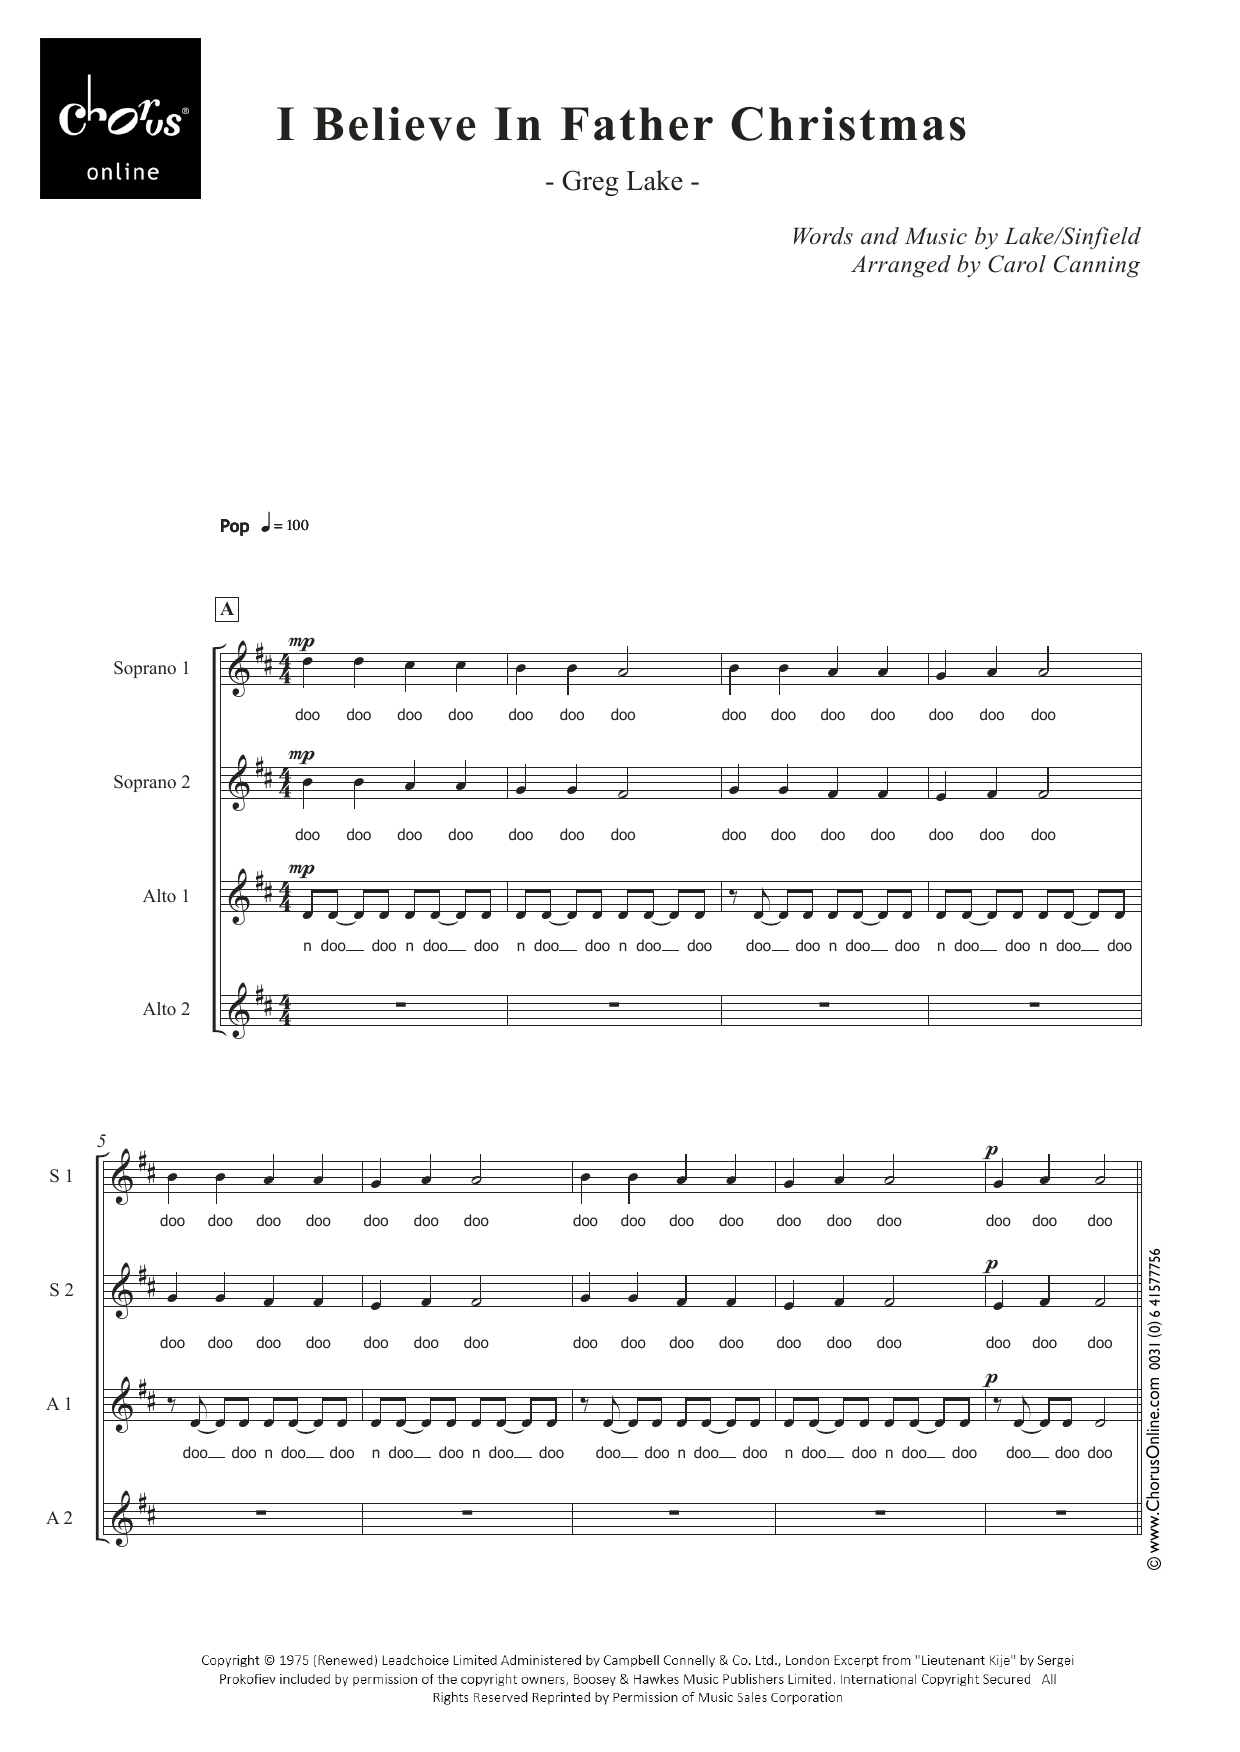 Greg Lake I Believe In Father Christmas (arr. Carol Canning) sheet music notes printable PDF score